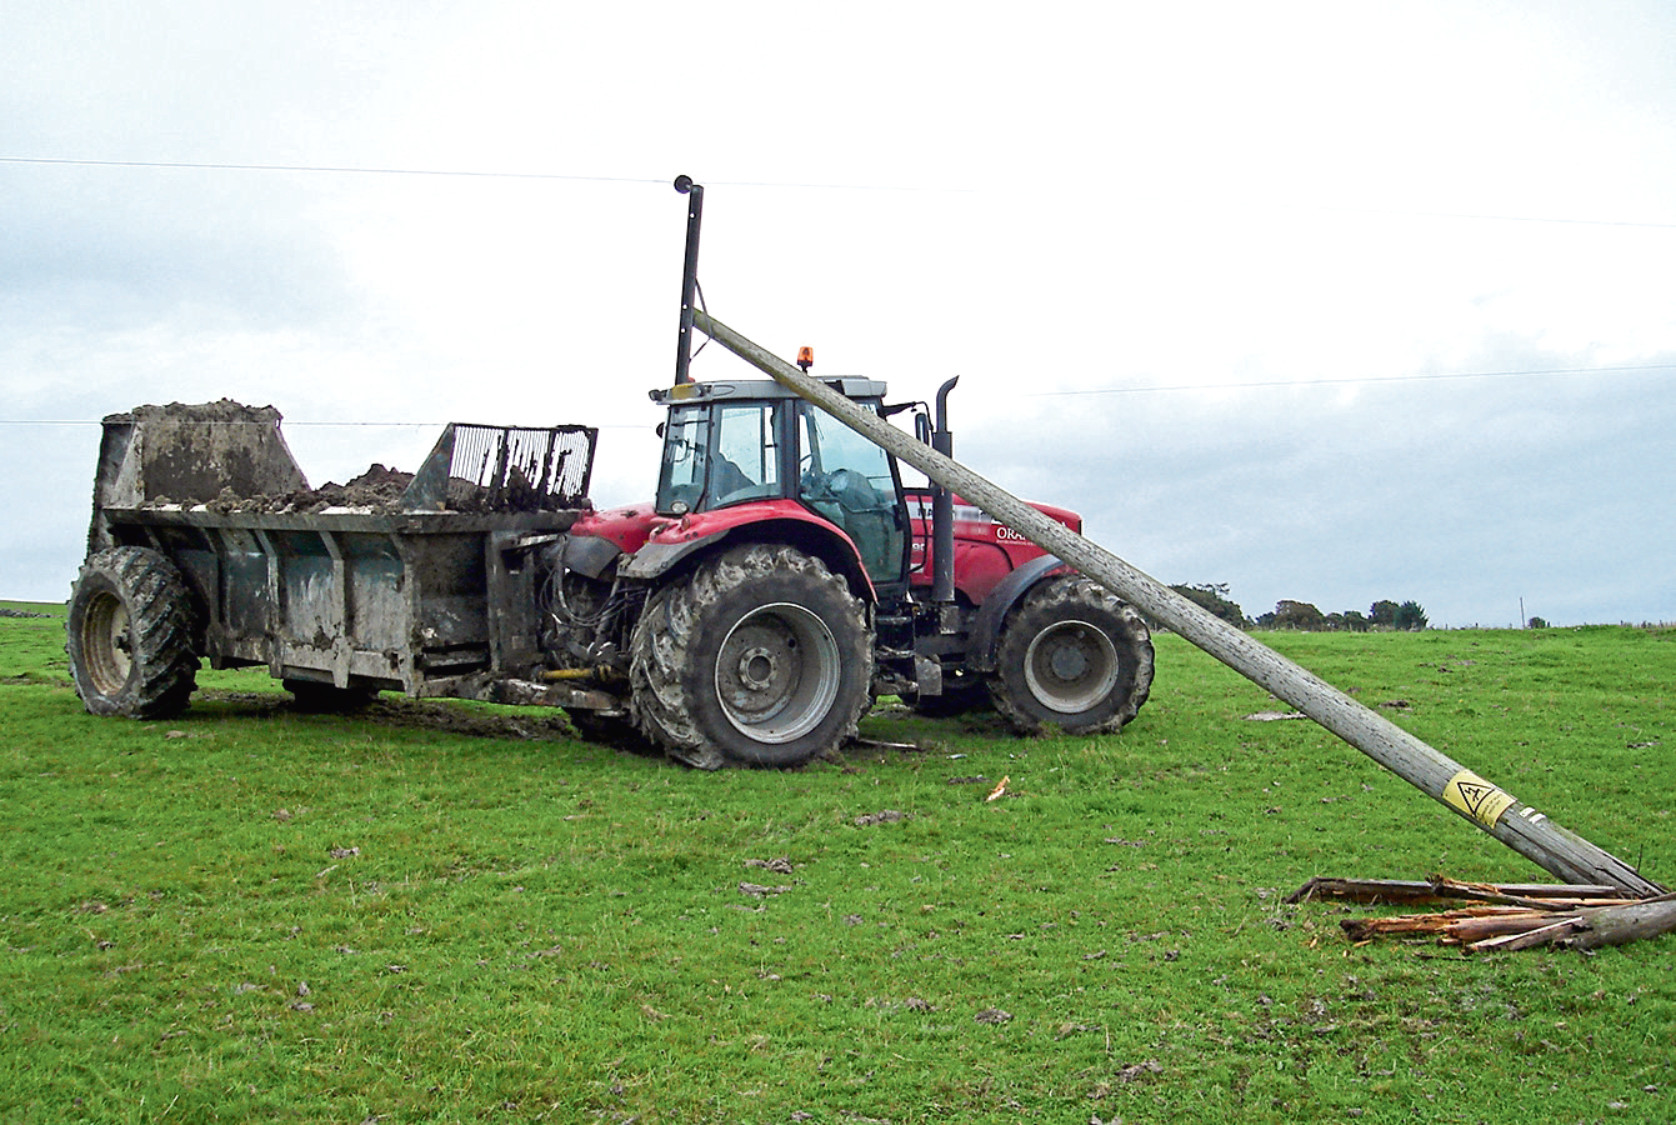 Farmers are advised to stay in their cab and dial 105 if machinery touches an overhead line.